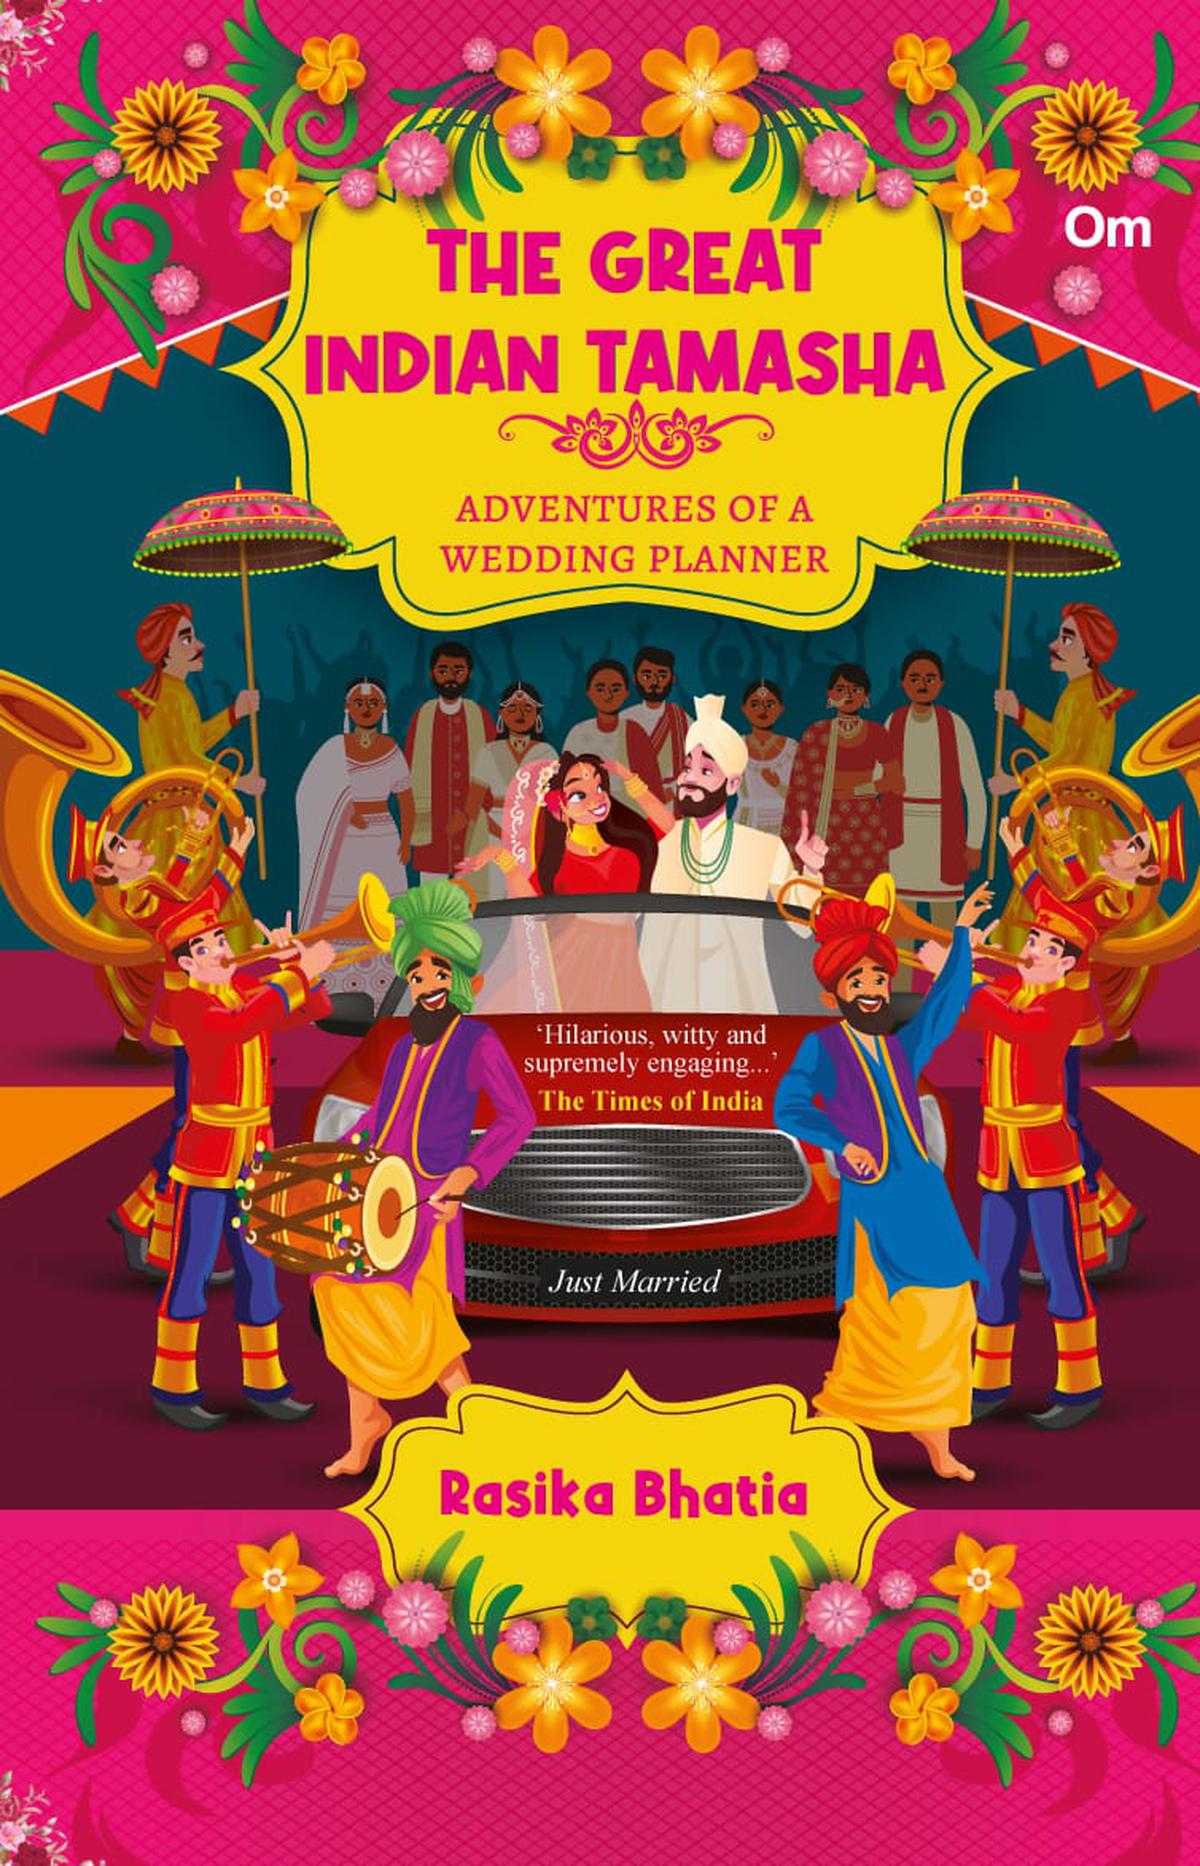 The quirky cover of The Great Indian Tamasha